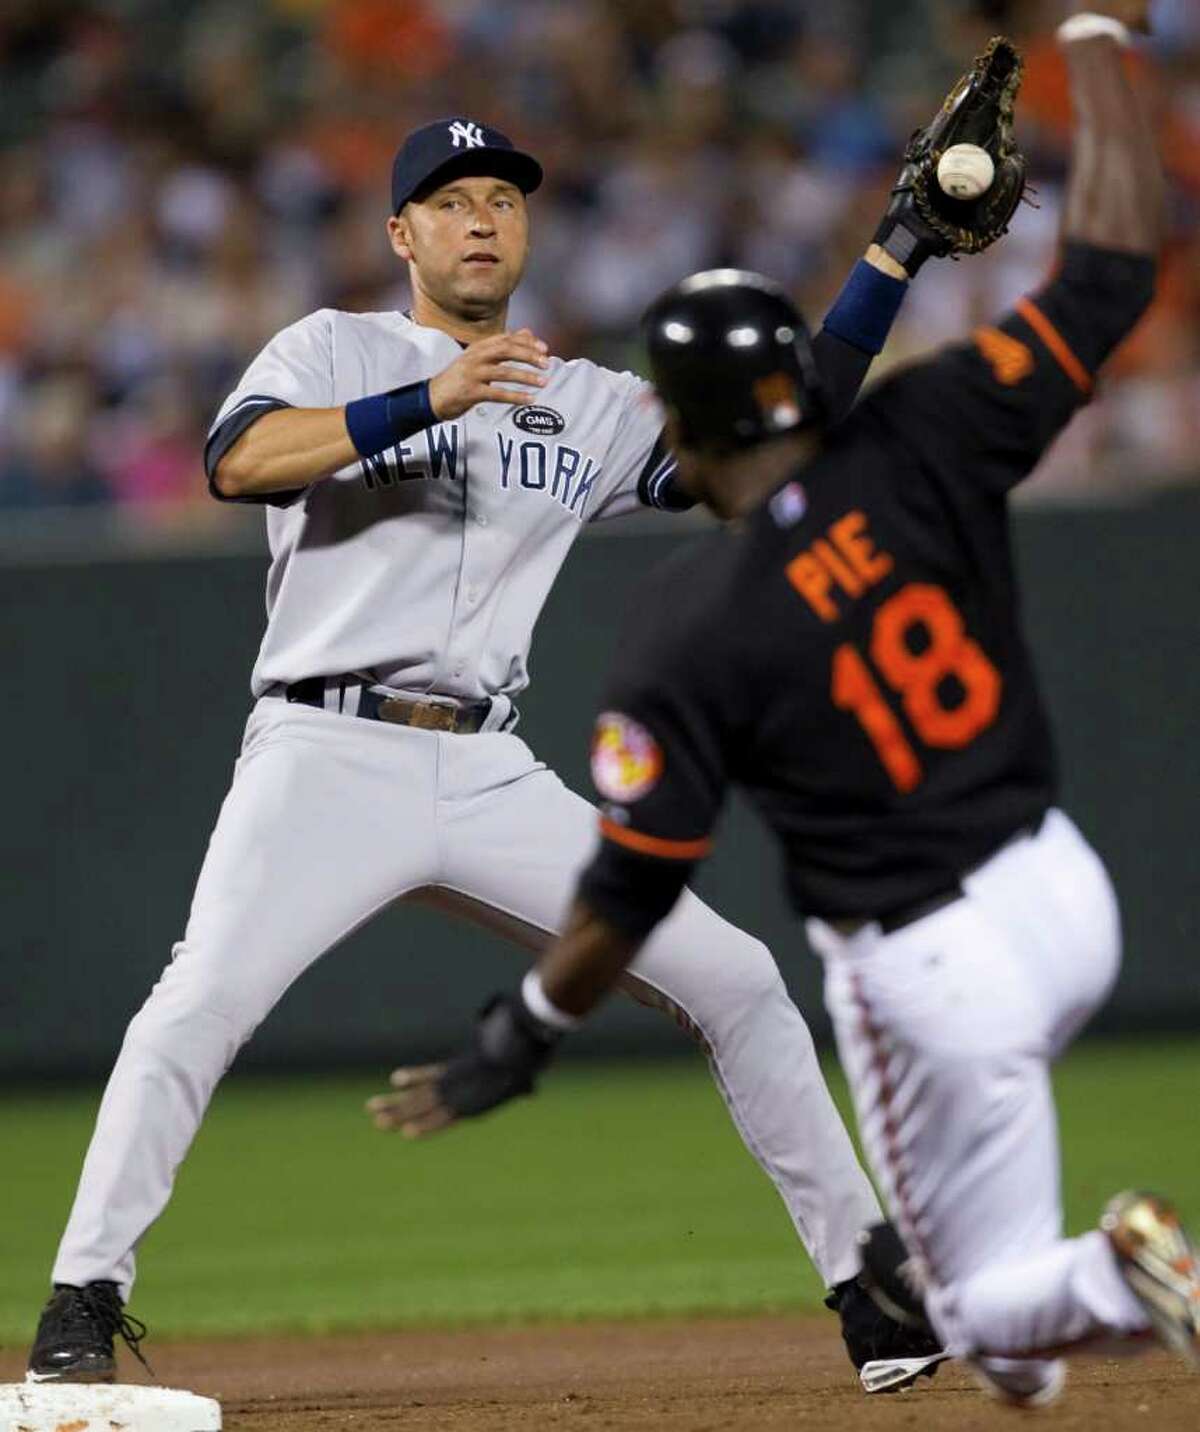 New York Yankees shortstop Derek Jeter forces out Baltimore Orioles' Felix Pie (18) at second base then drop the ball failing to get the runner at first during the second inning of a baseball game, Friday, Sept. 17, 2010, in Baltimore. (AP Photo/Rob Carr)